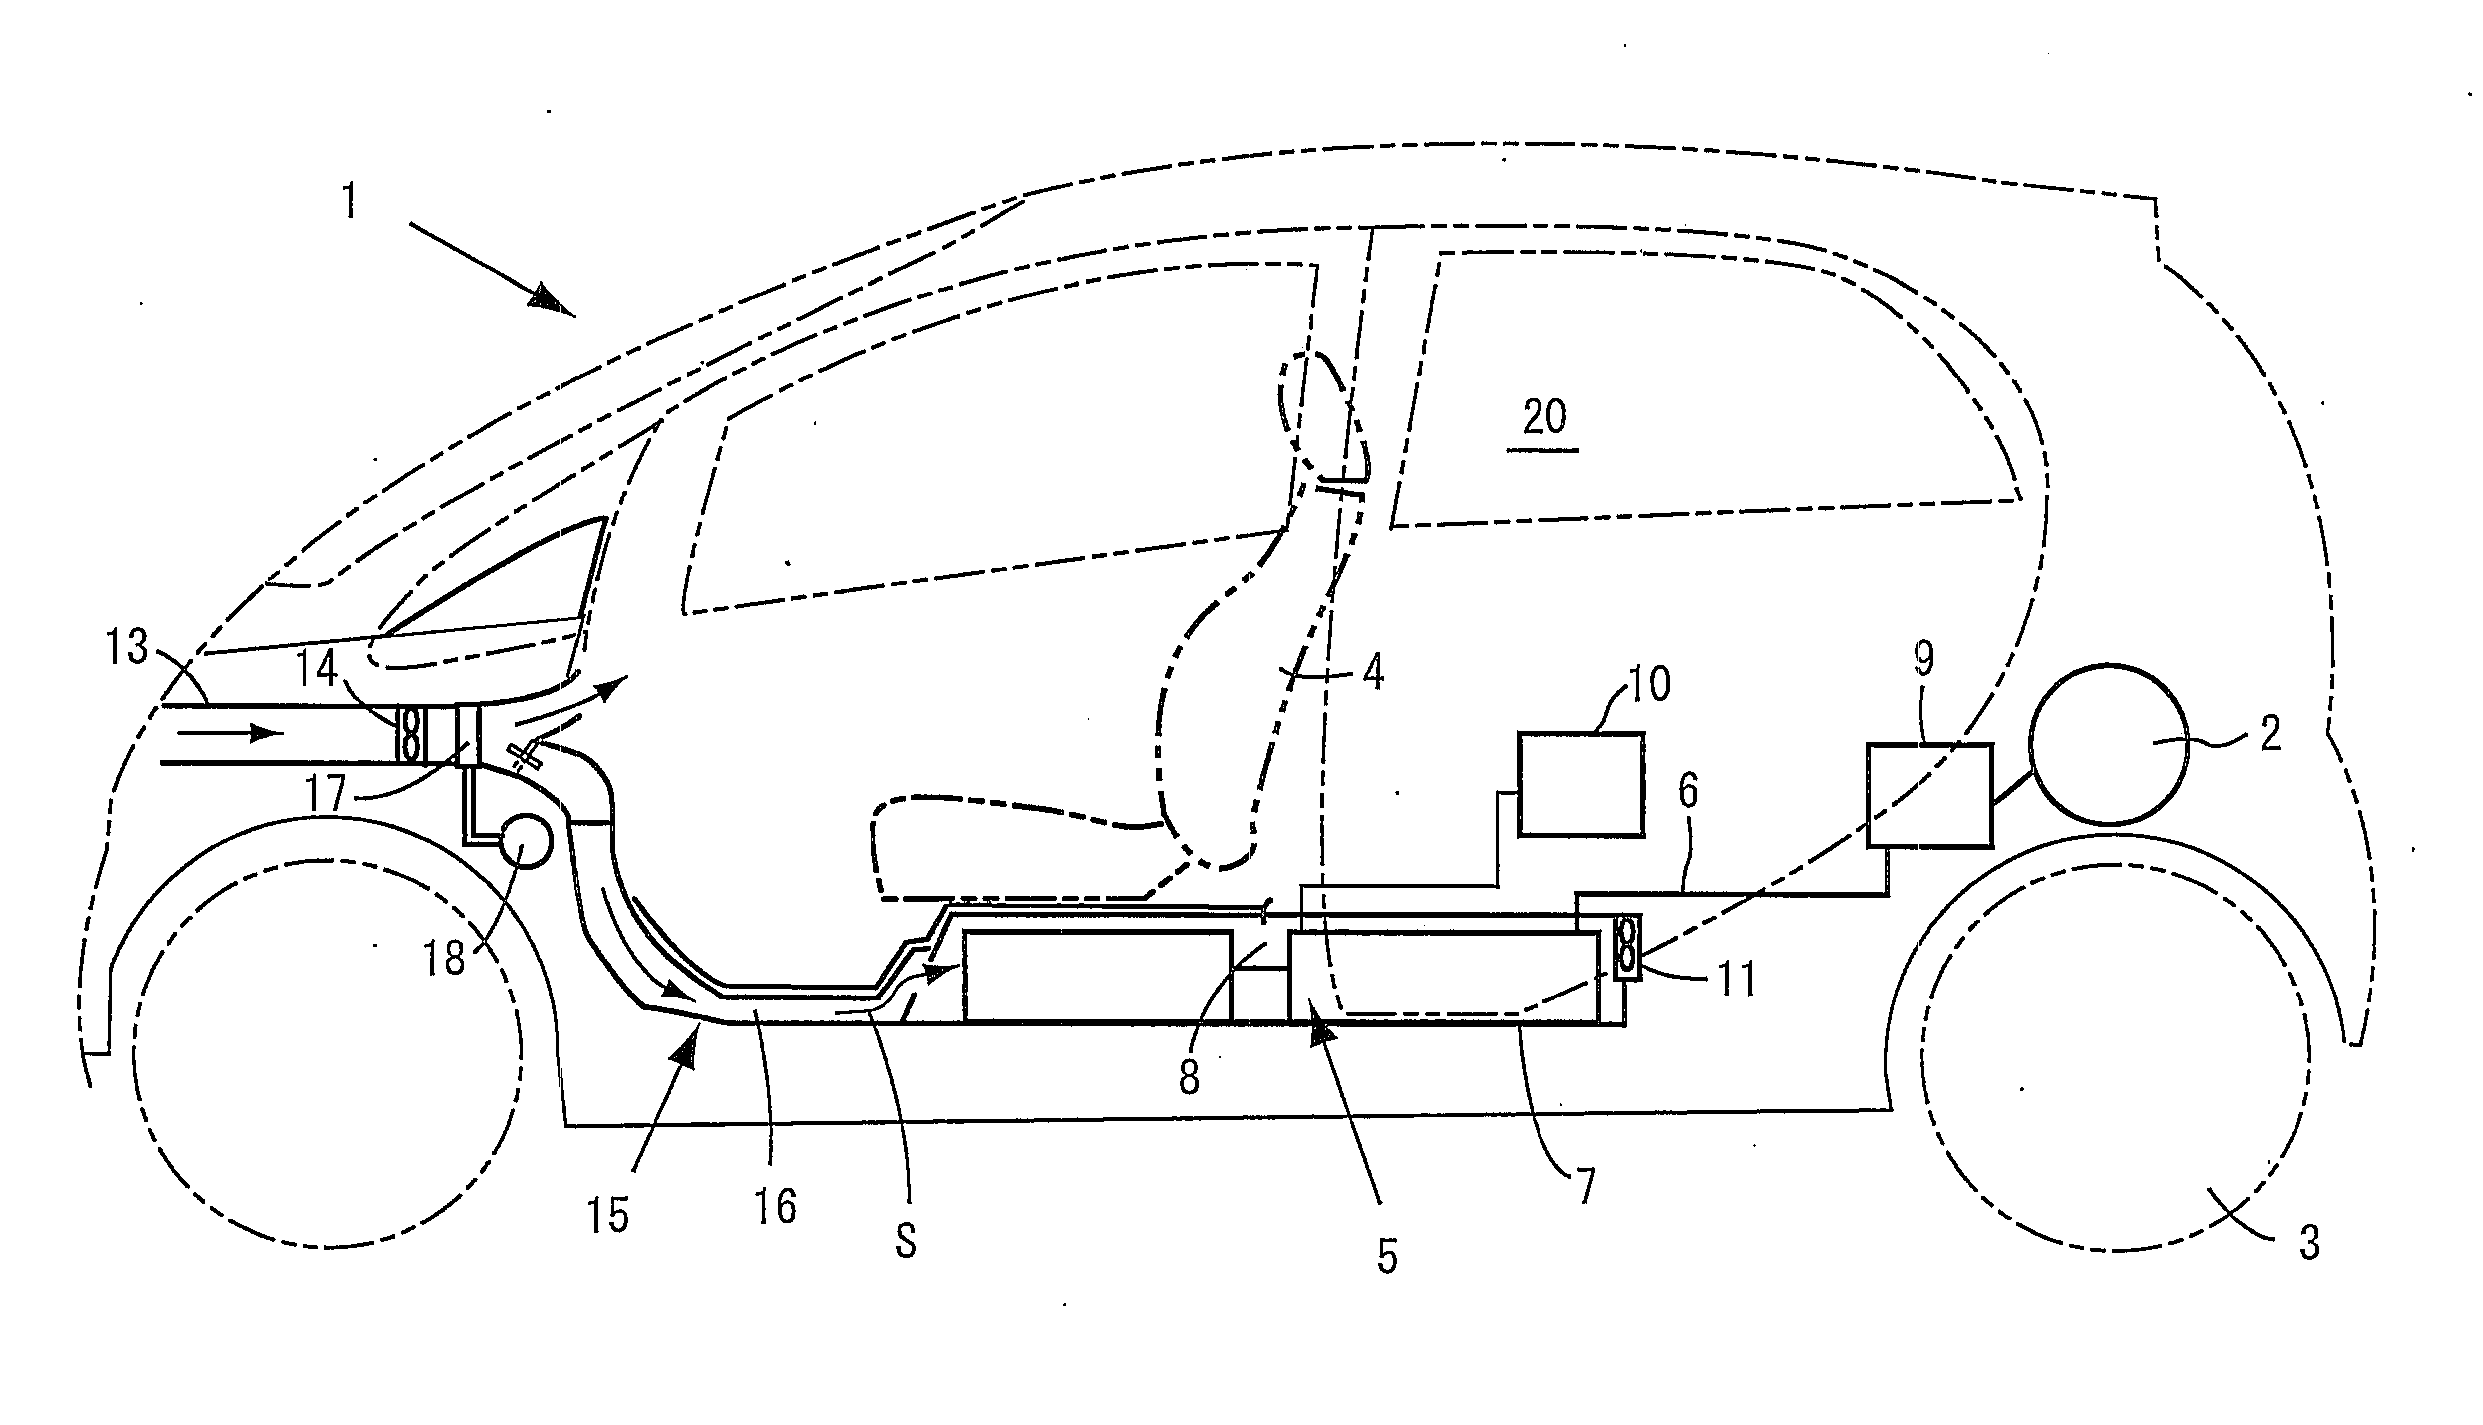 Battery management system for electric vehicle